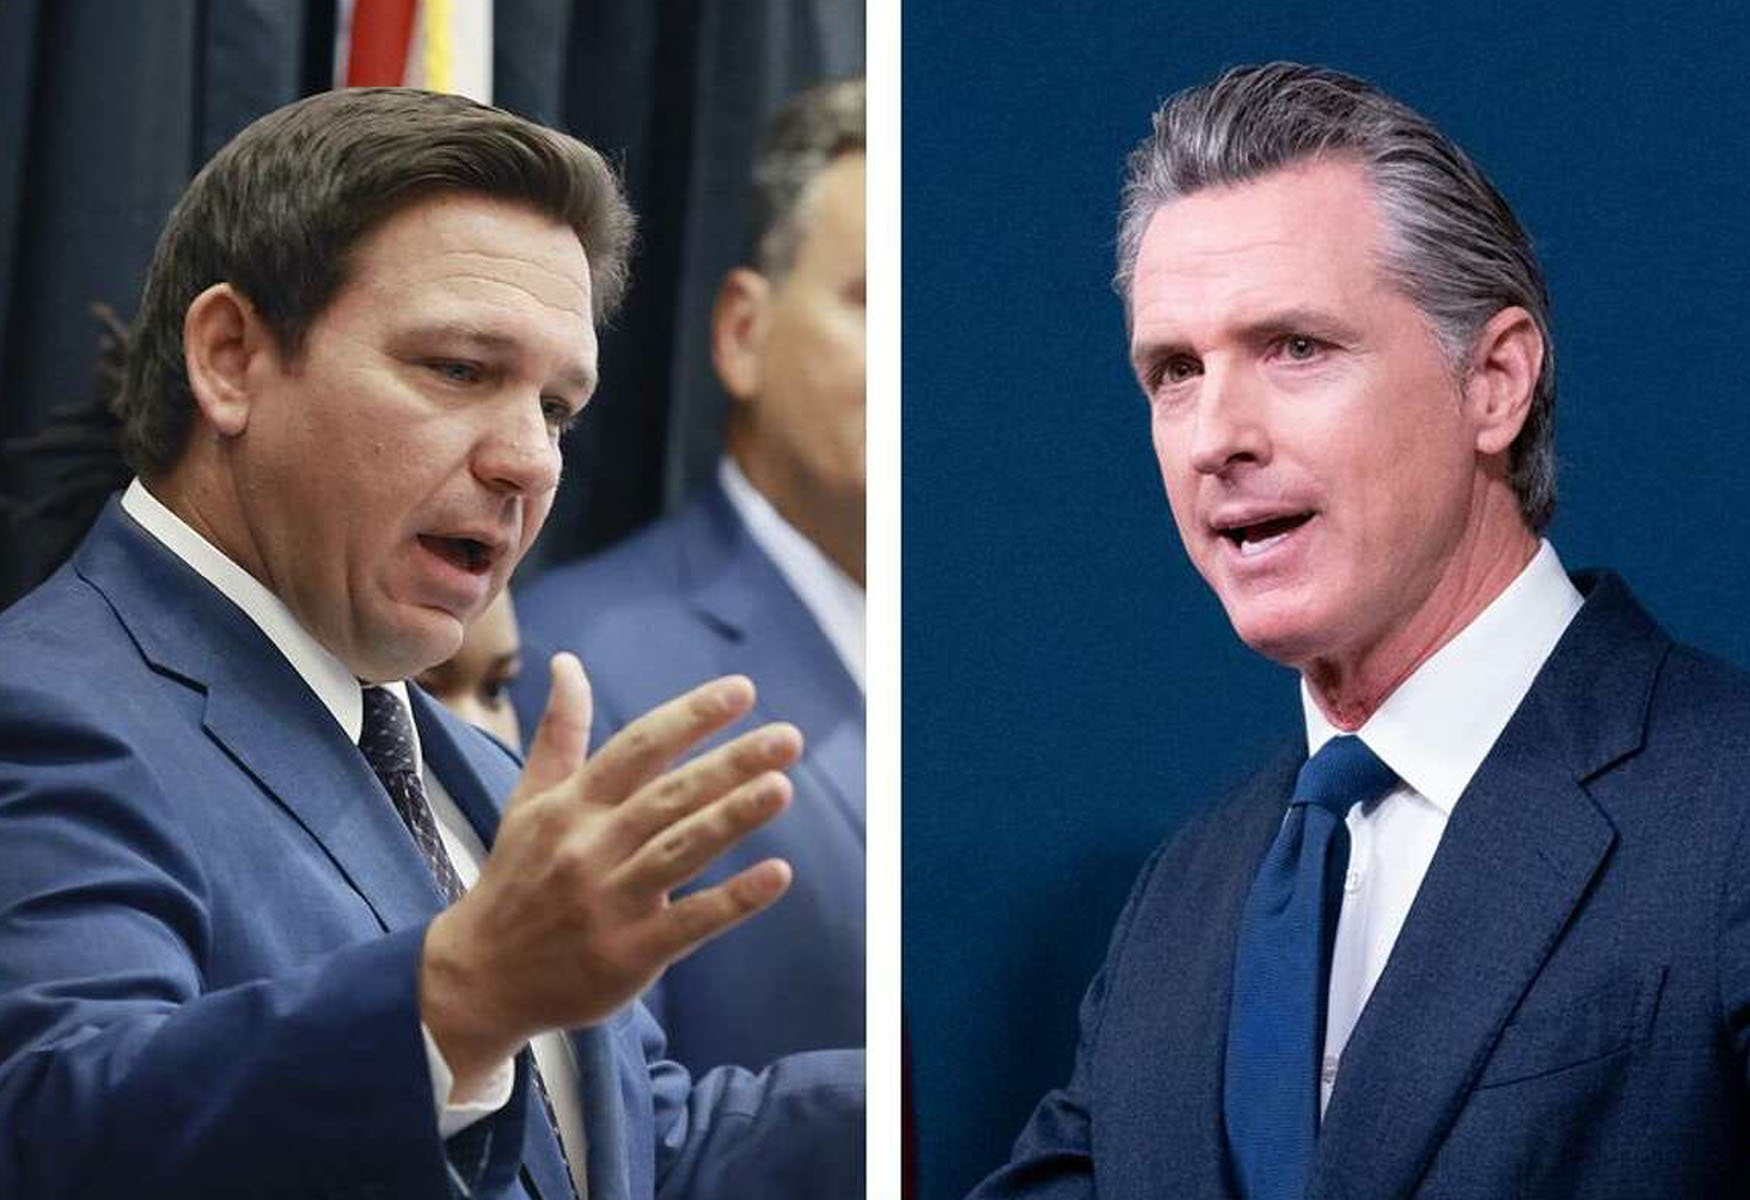 ron-desantis-sparks-controversy-by-using-poop-photo-to-attack-gavin-newsom-in-fox-news-debate